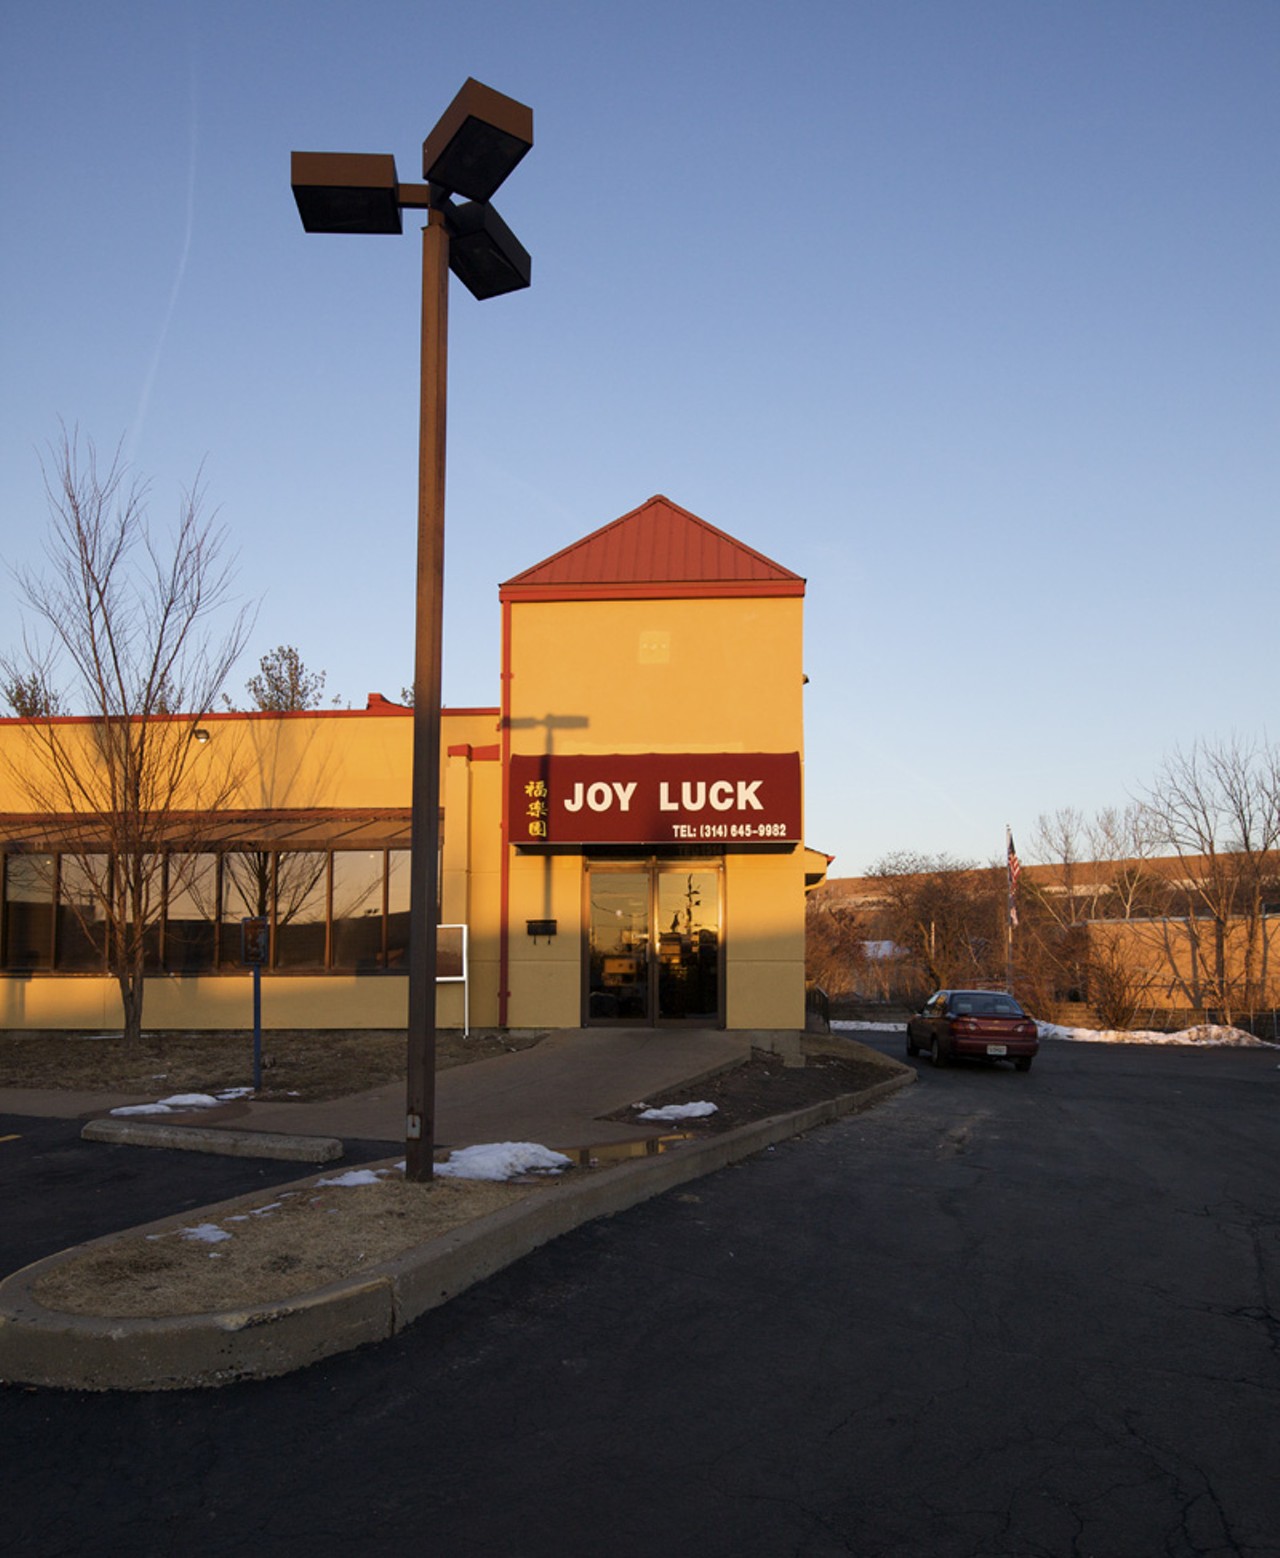 Joy Luck Chinese Buffet is located on Manchester, just west of Hanley.